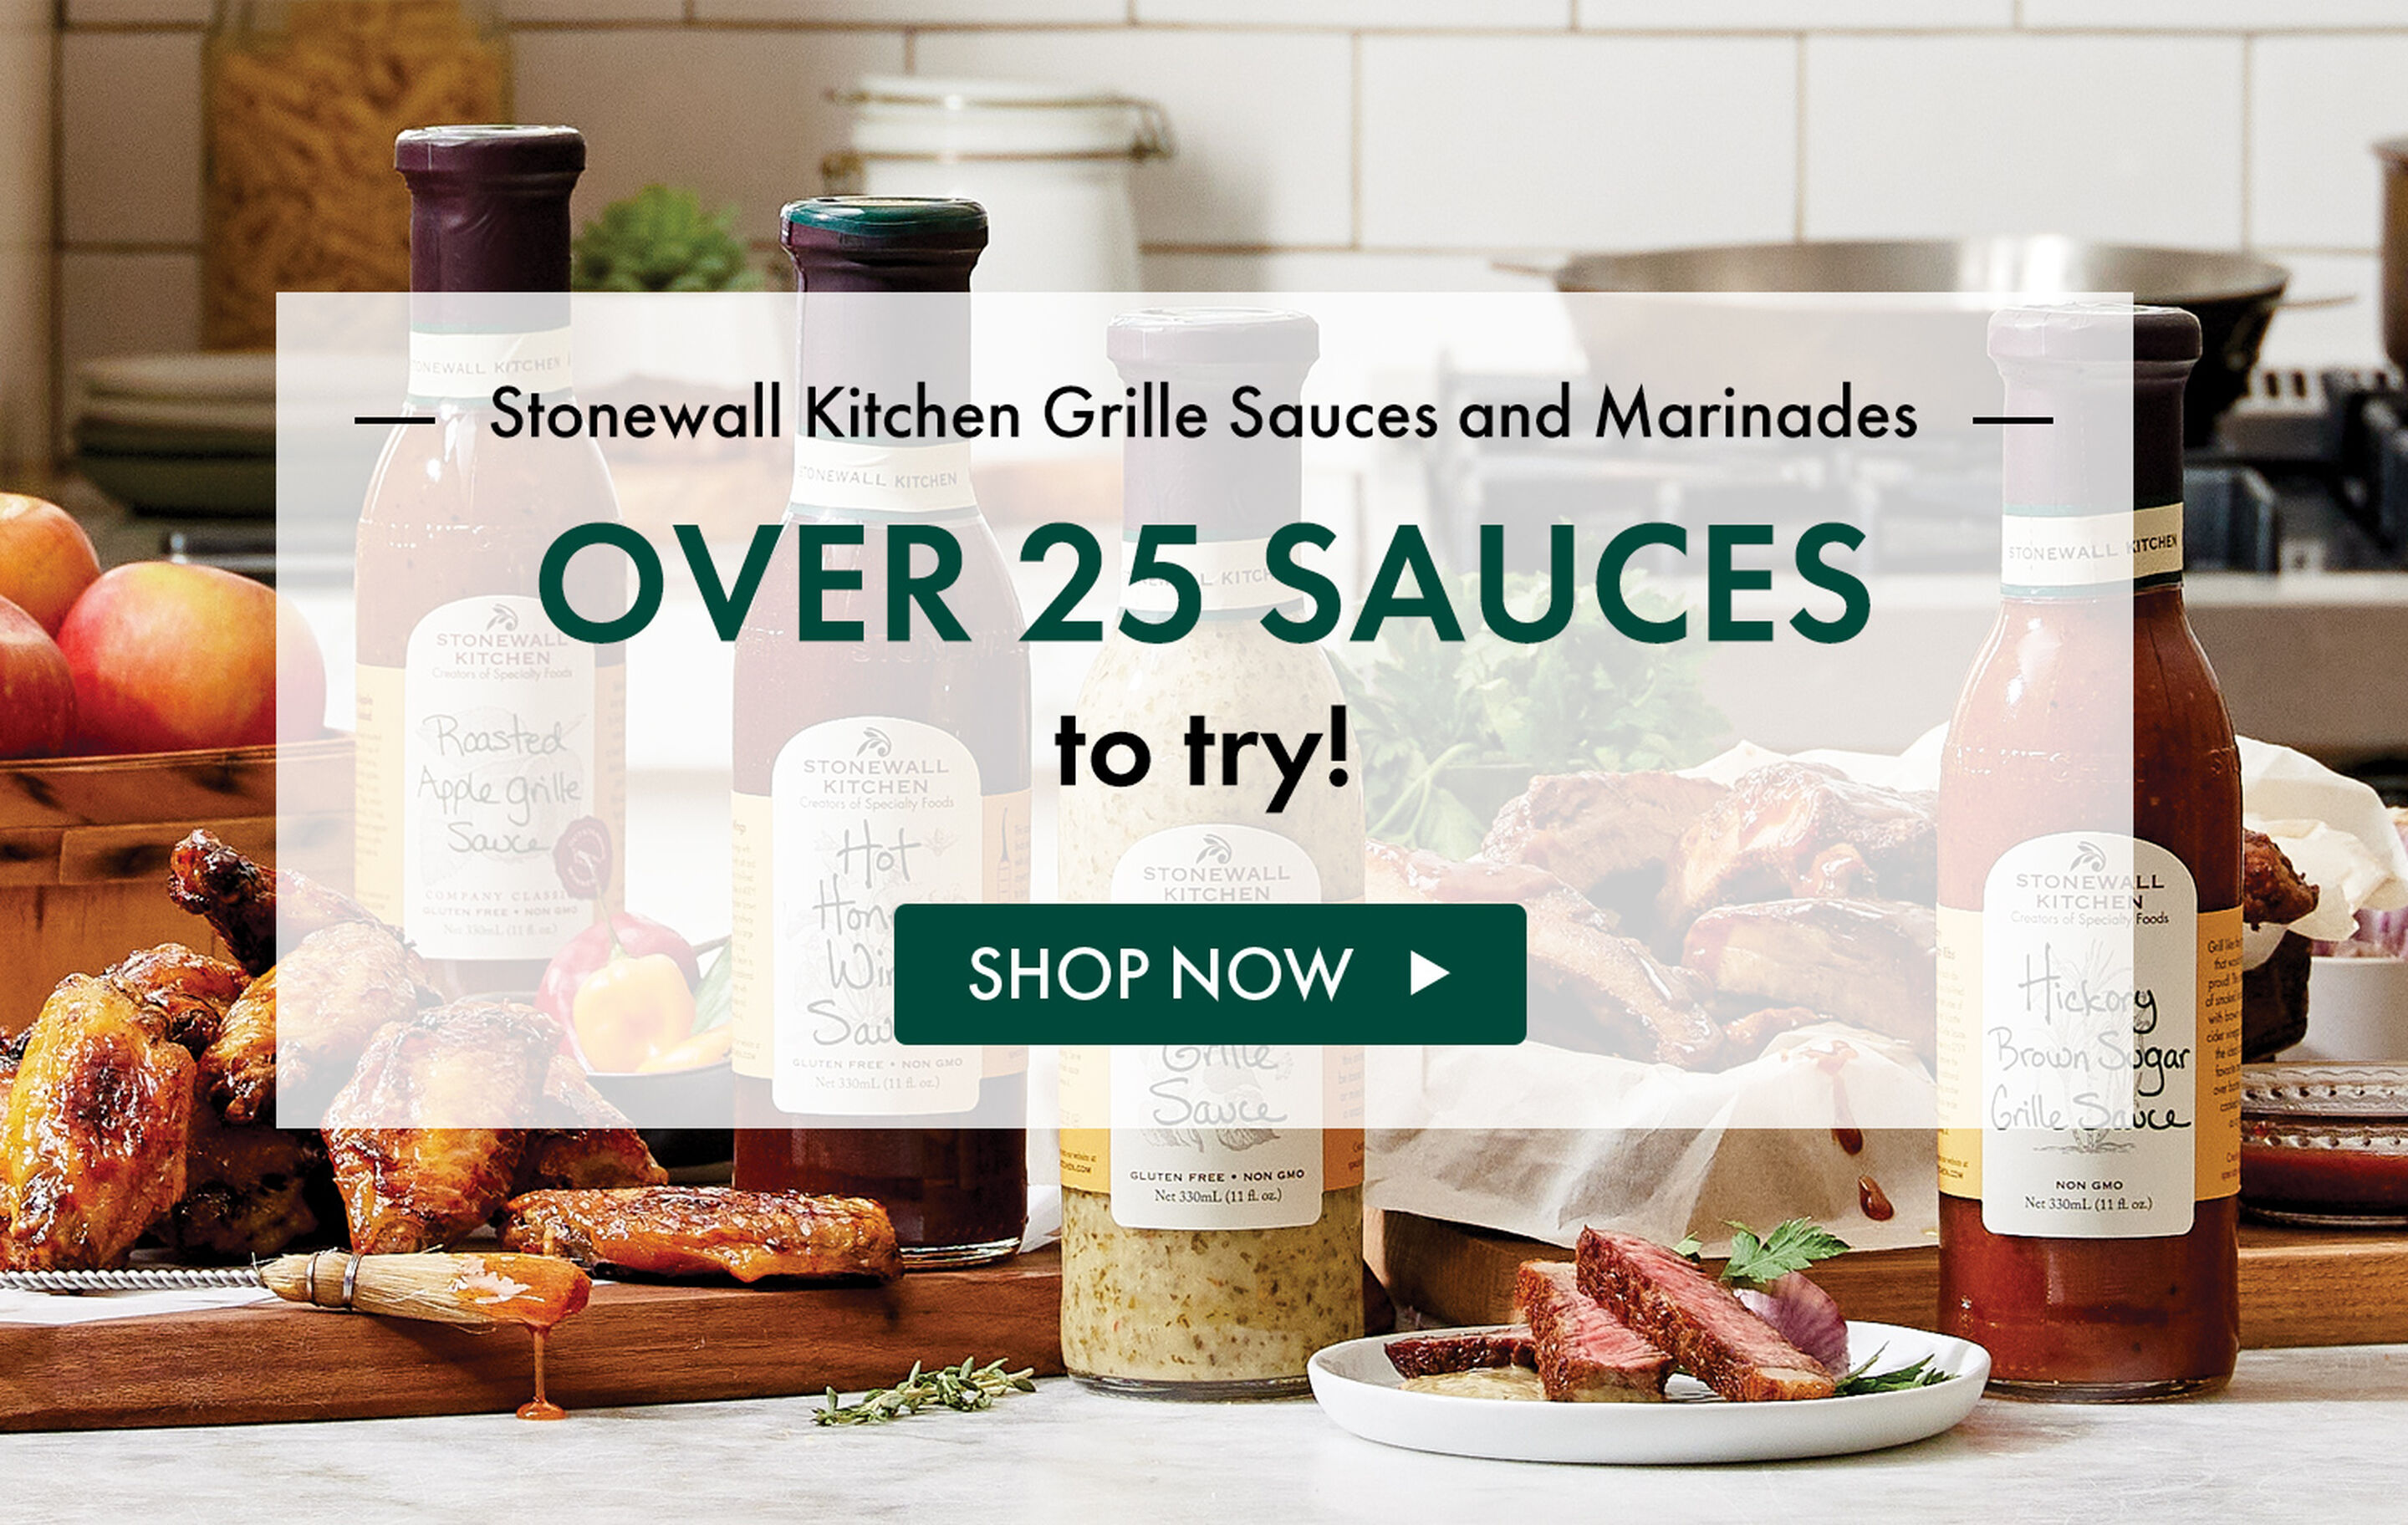 Stonewall Kitchen Grille Sauces and Marinades - Over 25 Sauces to try! - Shop Now